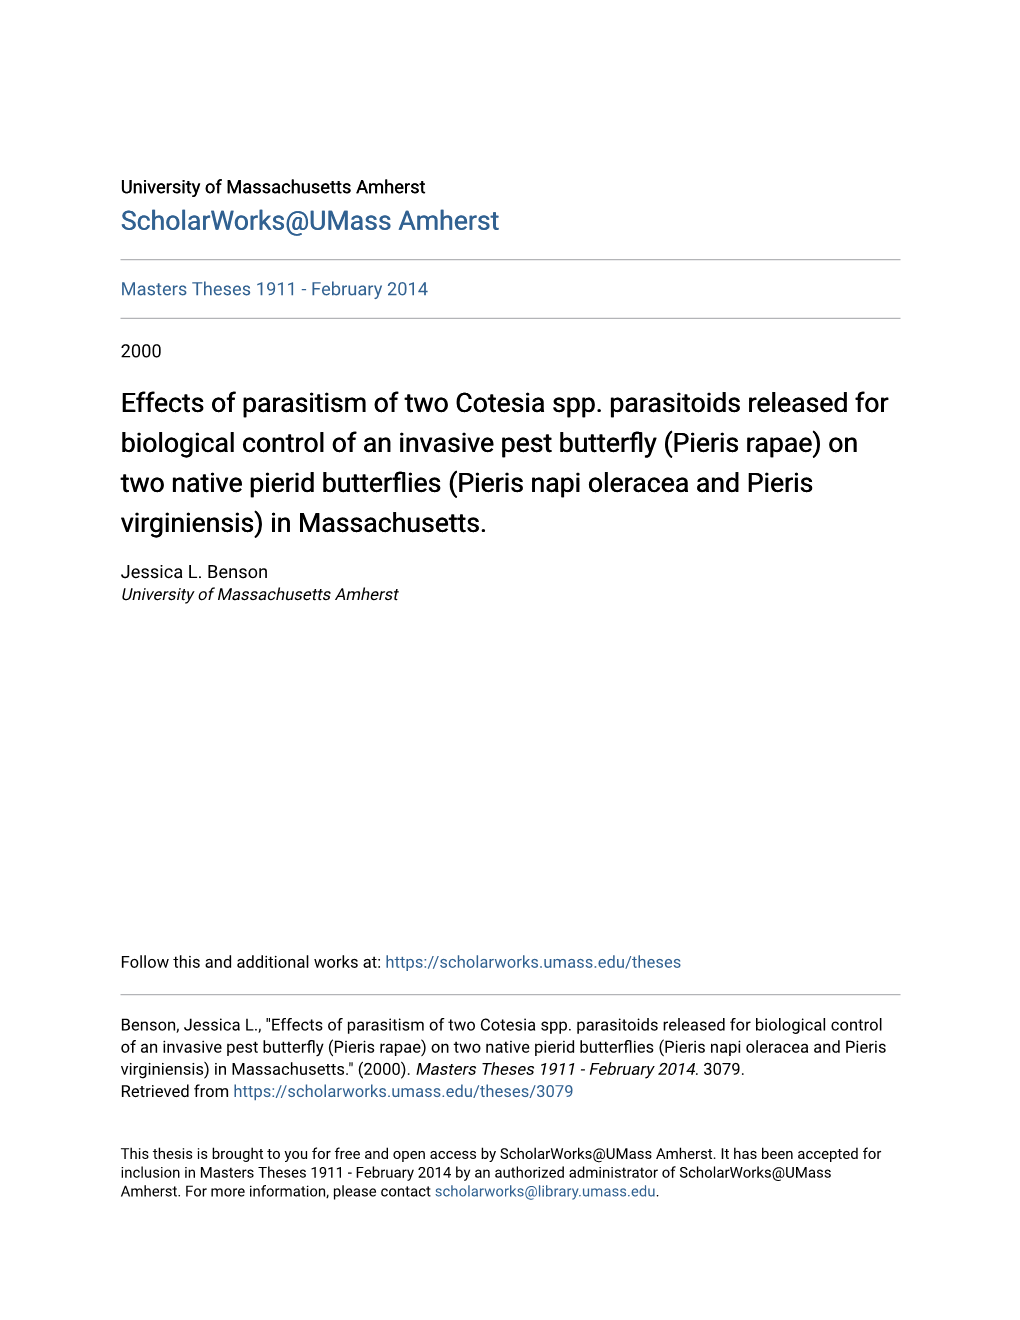 Effects of Parasitism of Two Cotesia Spp